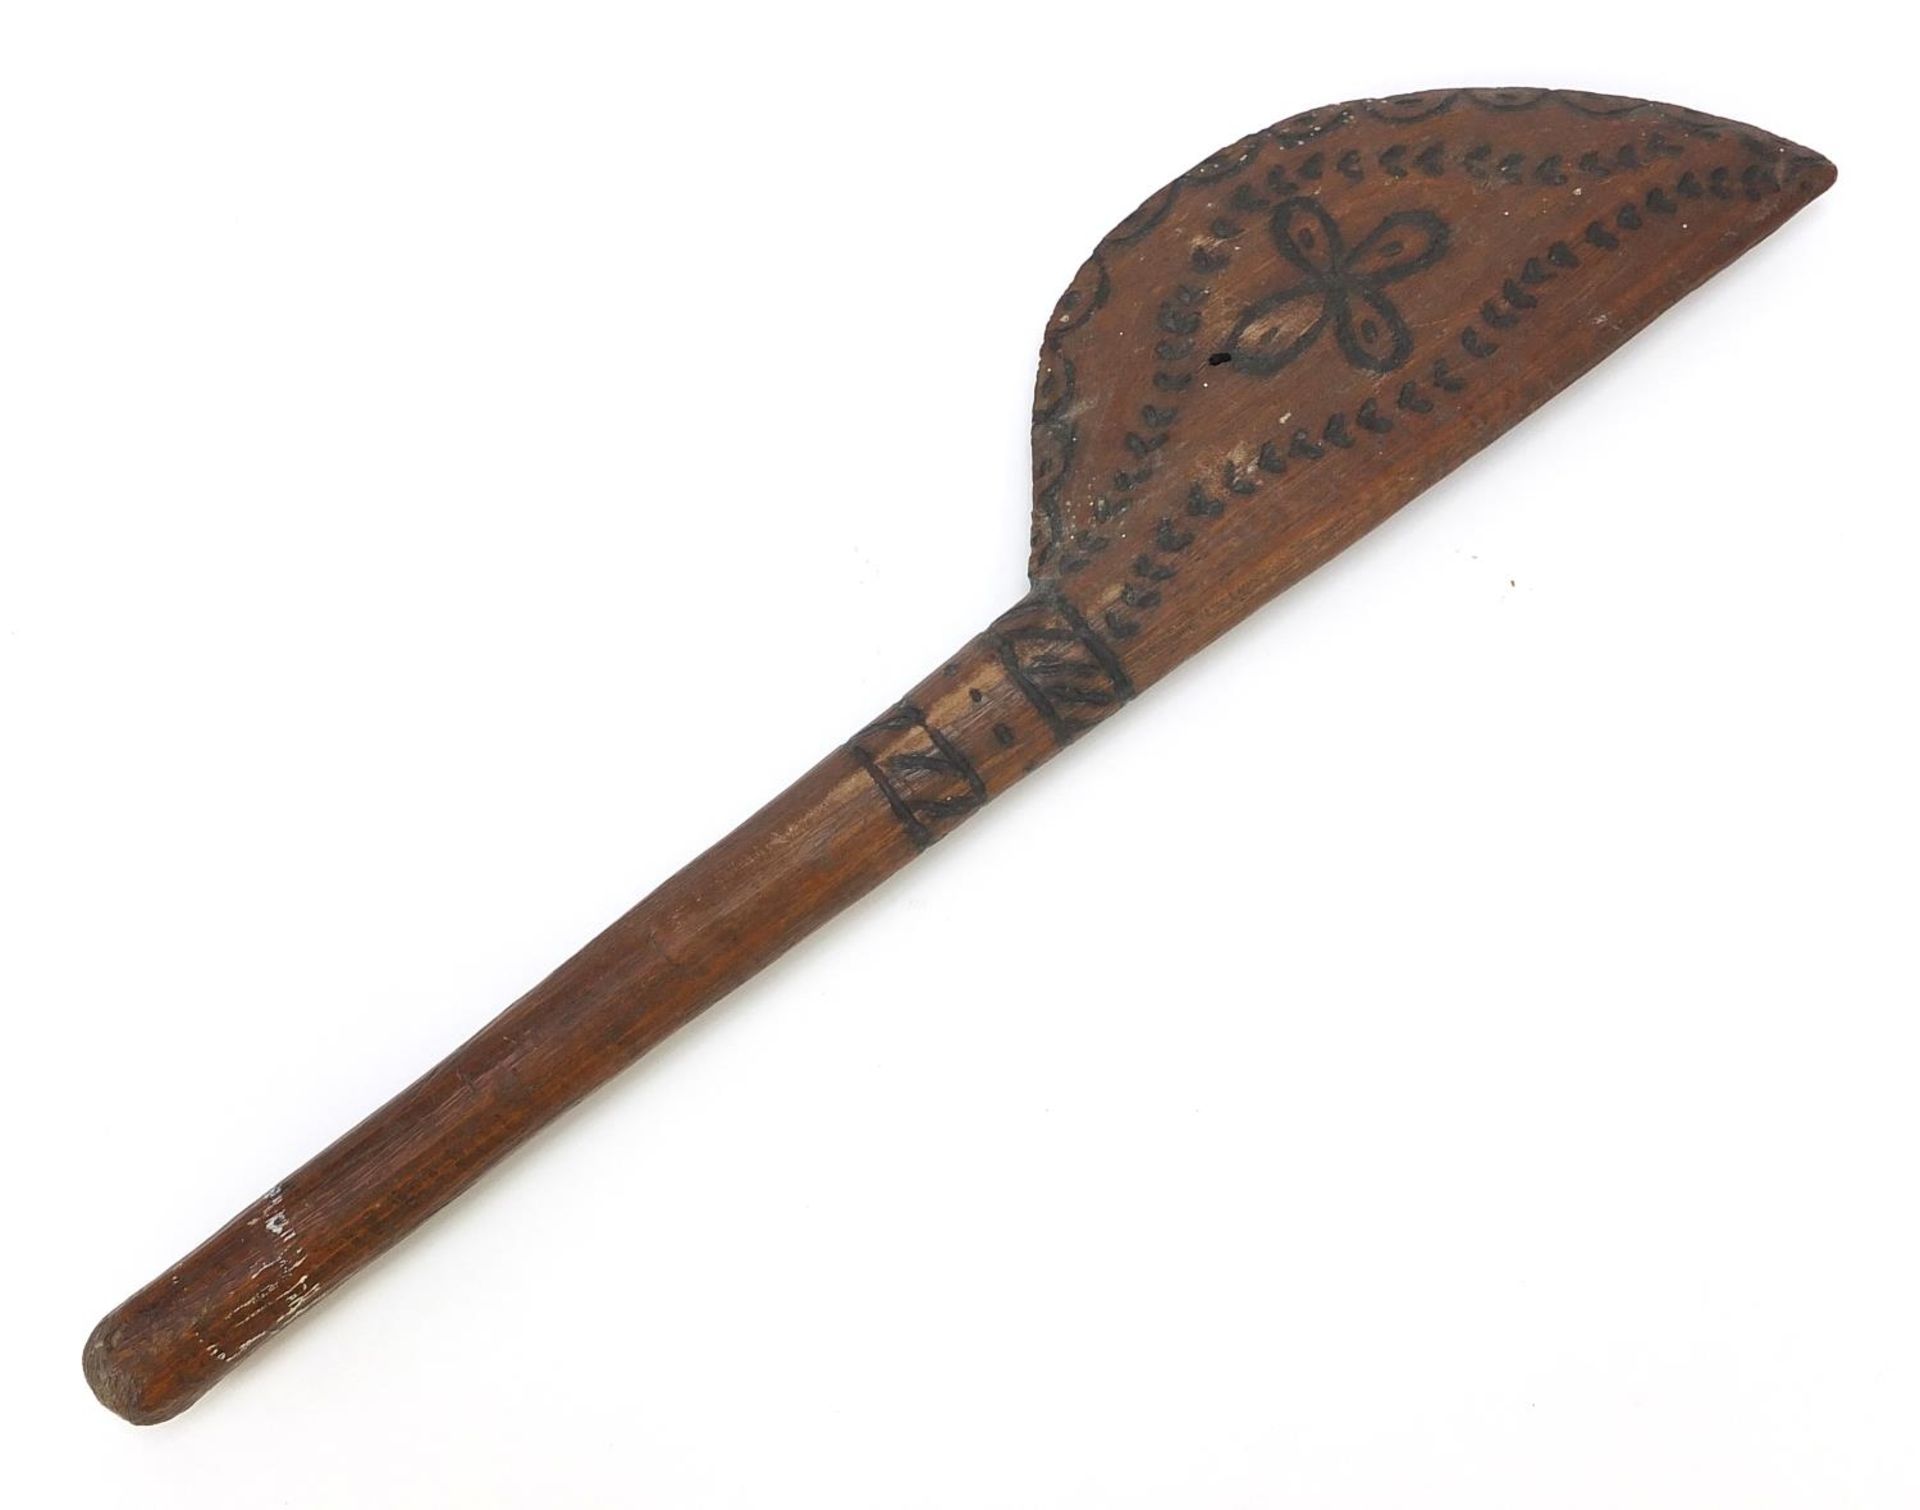 Tribal interest carved wooden paddle possibly Polynesian, 44cm in length